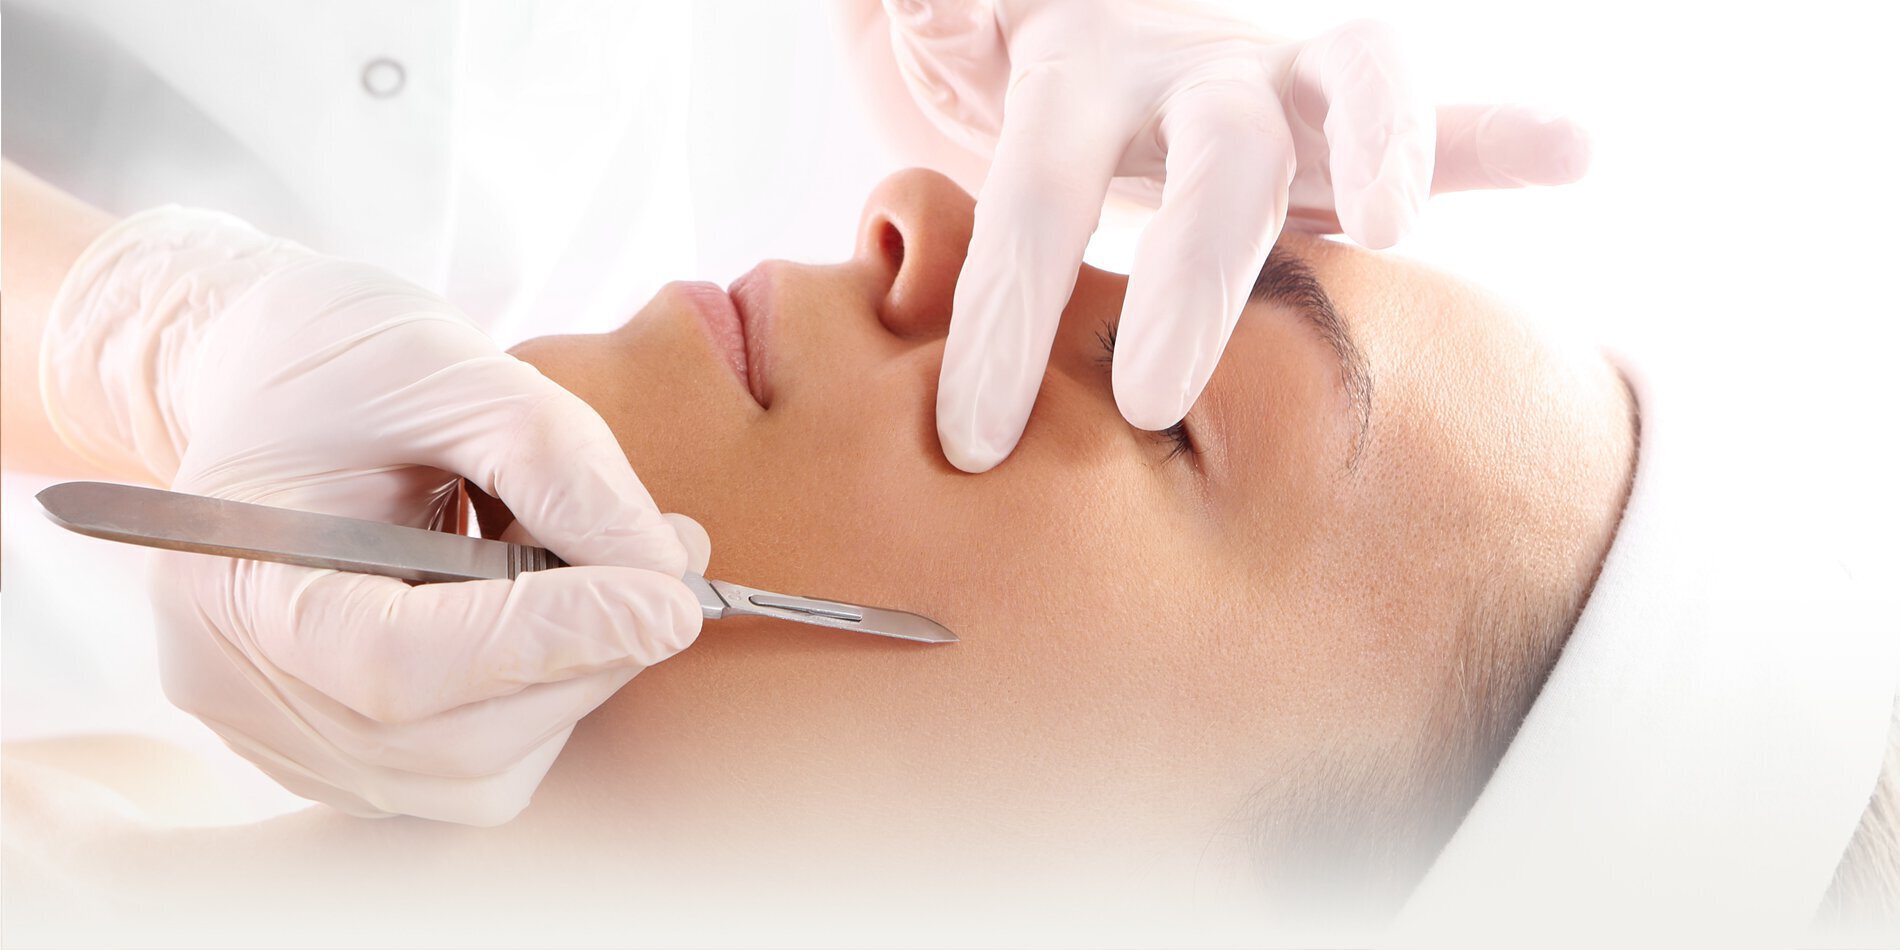 Why Laser Treatments Should Be Done During the Winter Months